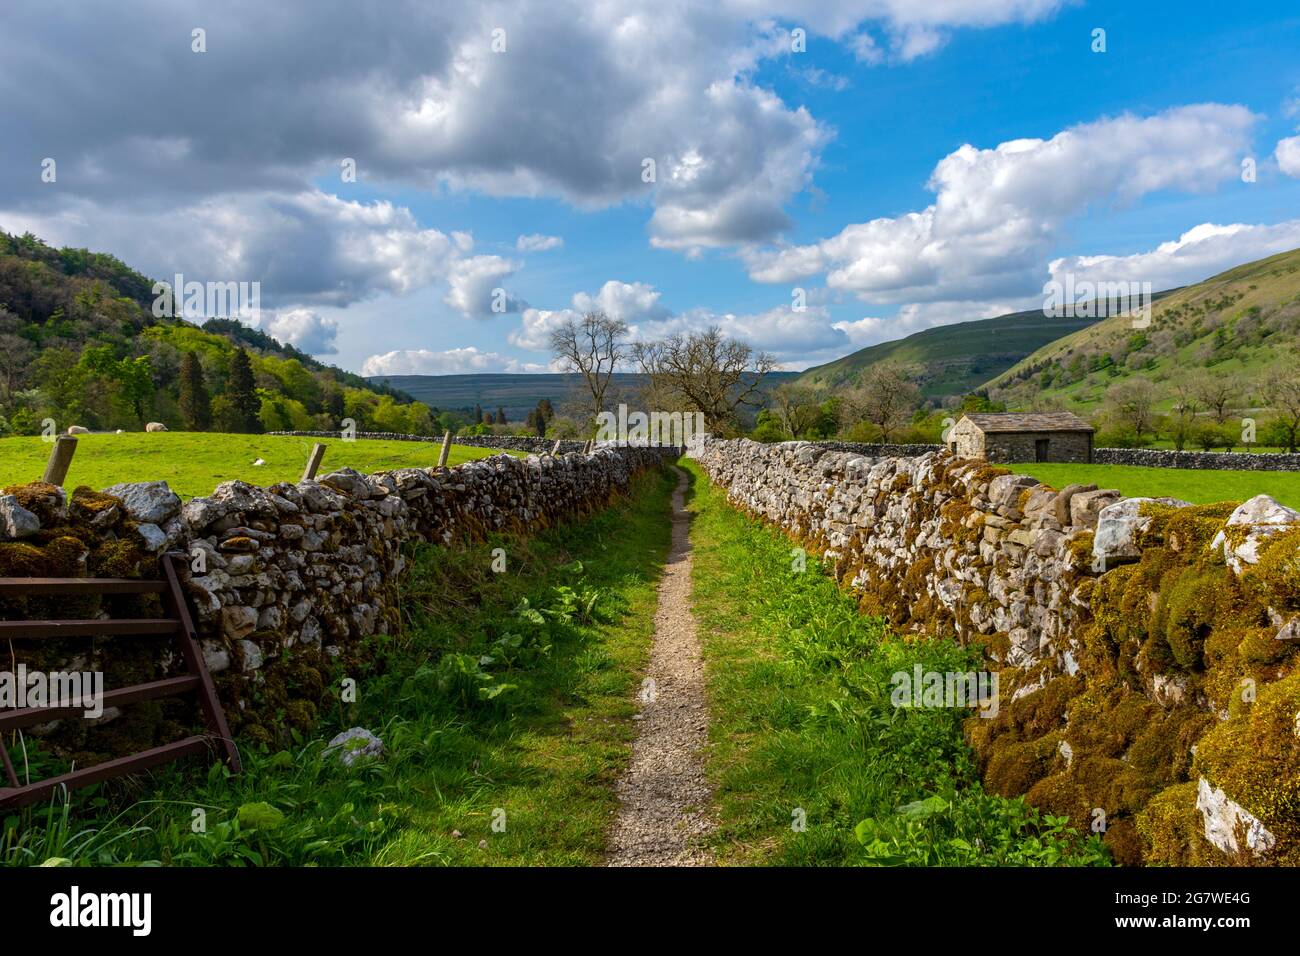 Dry stone walls on the Dales Way footpath, Upper Wharfedale, Yorkshire Dales National Park, Yorkshire, England, UK Stock Photo